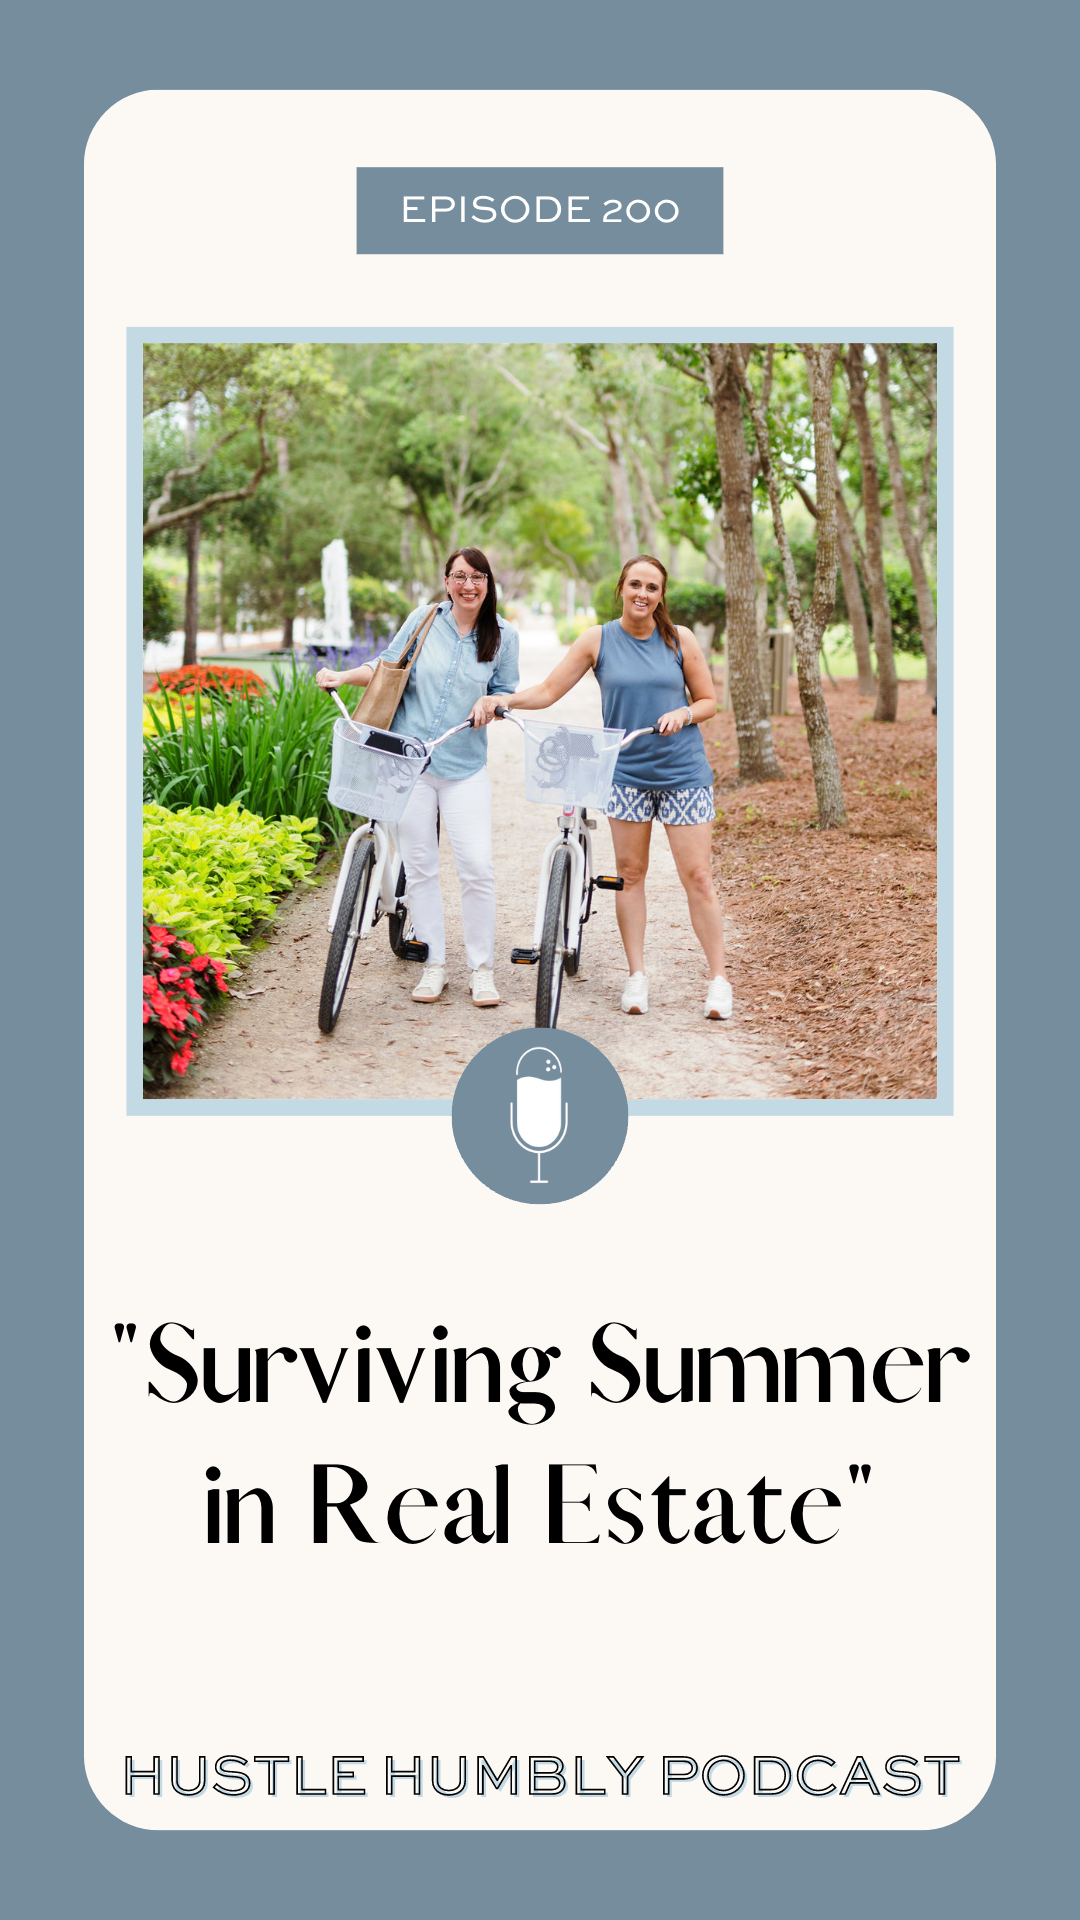 Podcast episode cover with title "200: Surviving Summer in Real Estate"